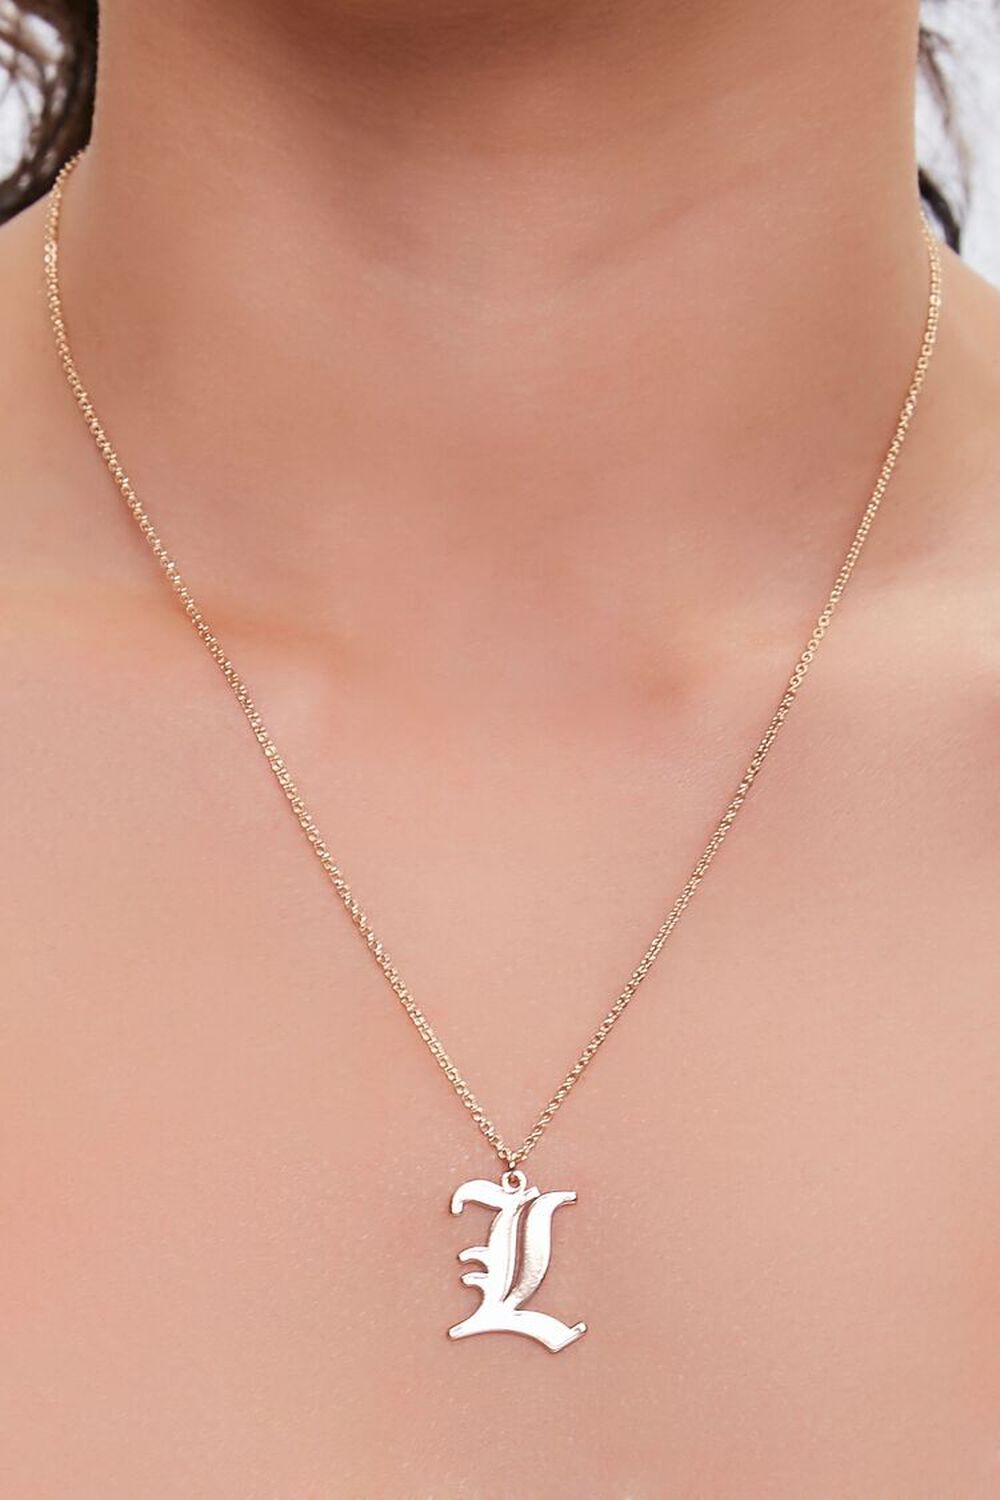 GOLD/L Initial Pendant Chain Necklace, image 1